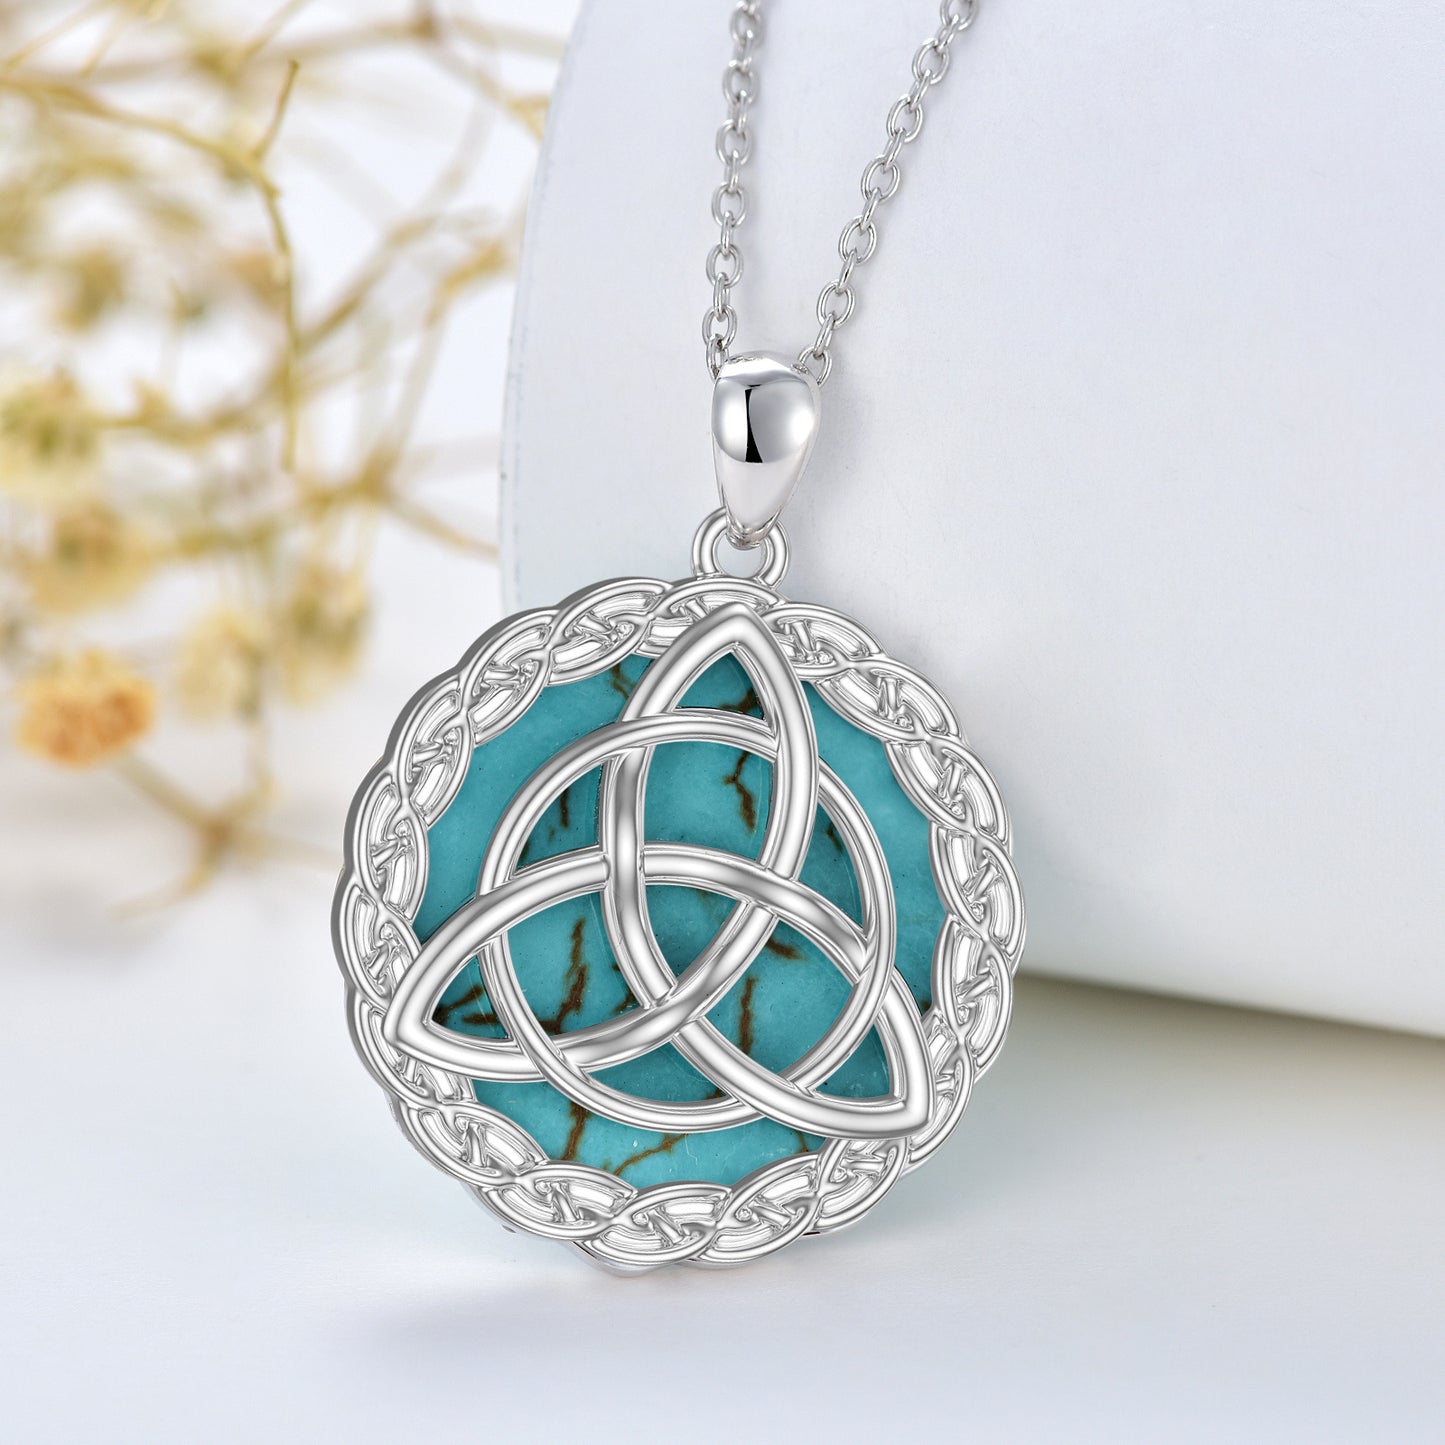 Celtic Necklace 925 Sterling Silver with Genuine Turquoise Trinity Knot Pendant Good Luck Irish Jewelry Gifts for Women